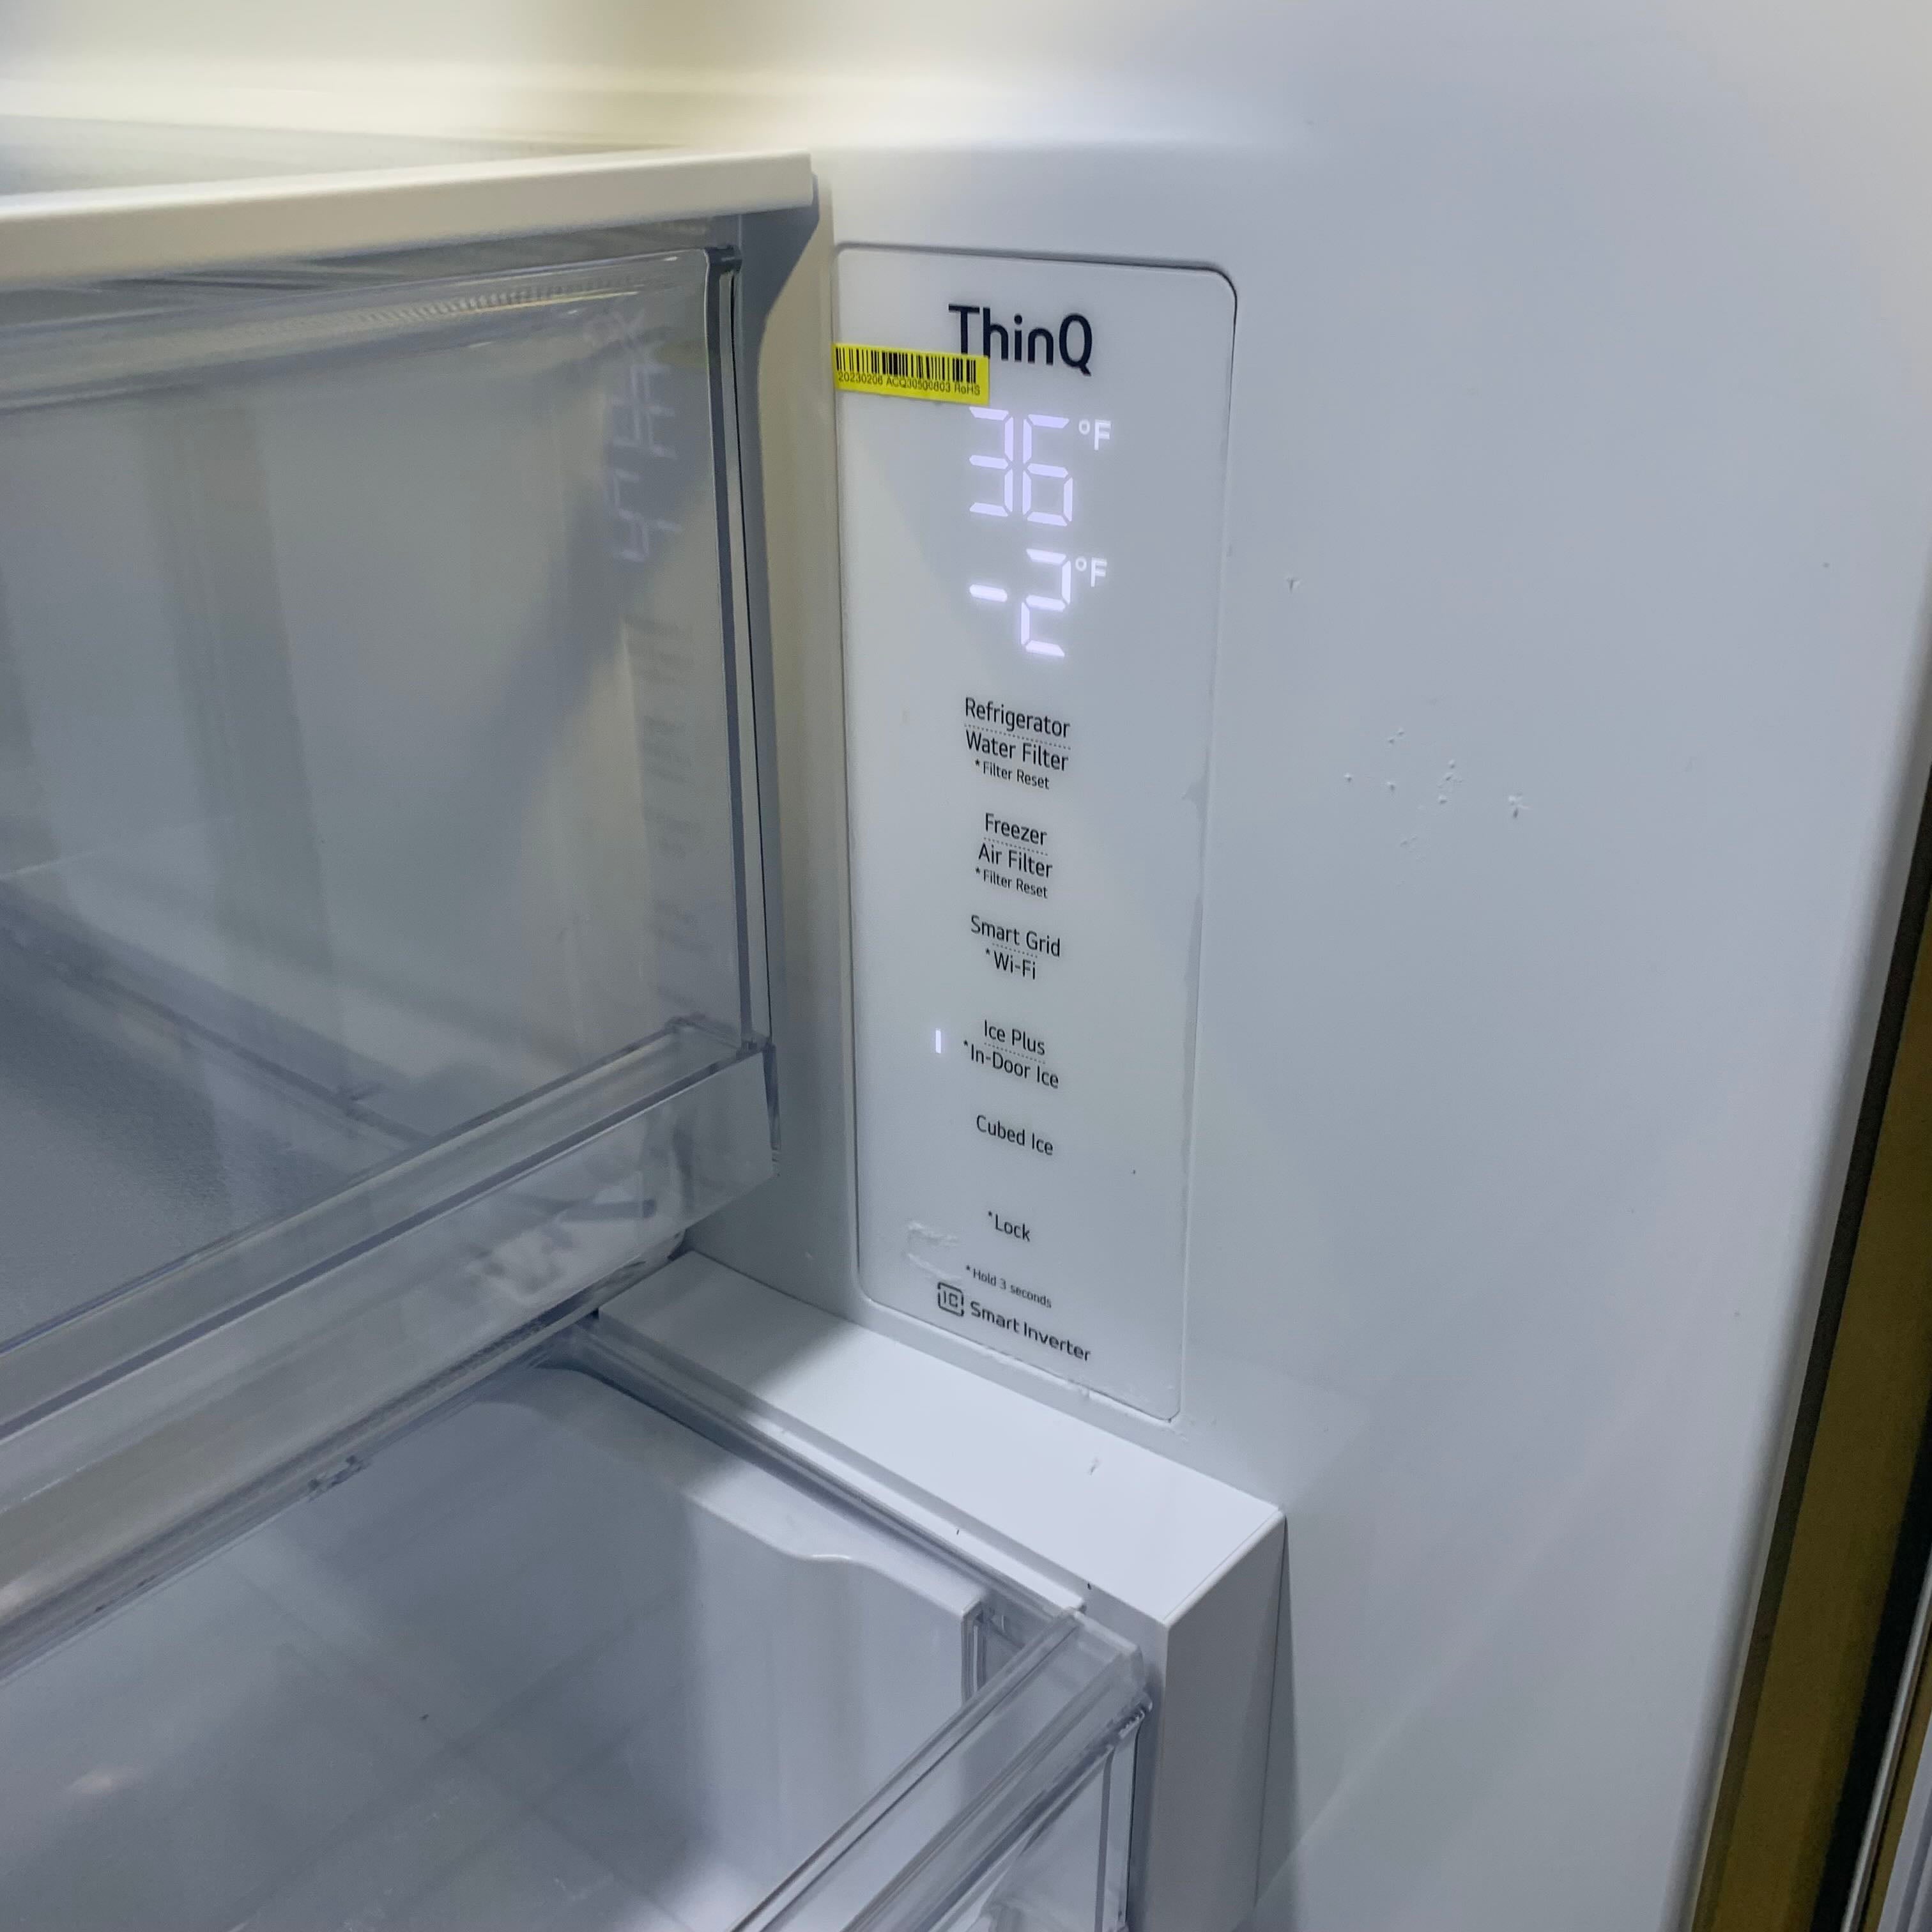 F823 LG Smart French Door Stainless Steel Refrigerator